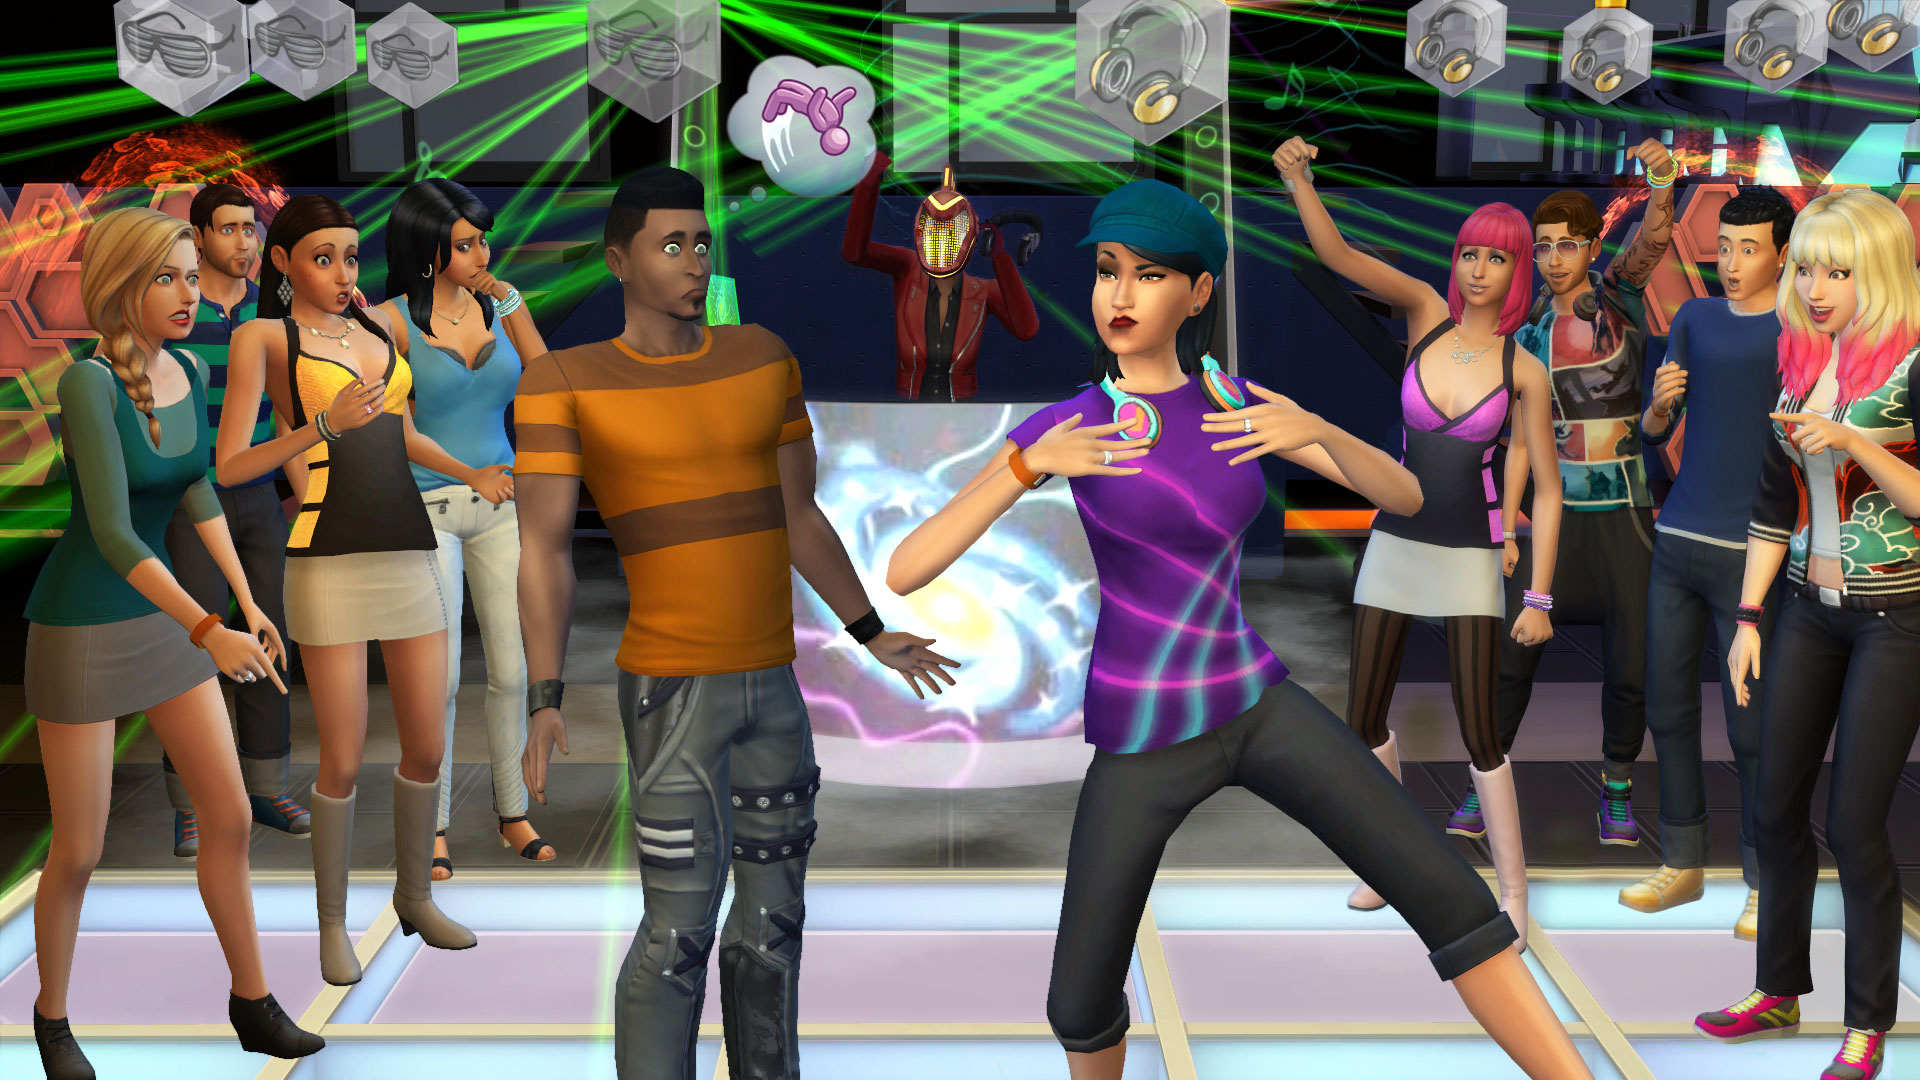 The Sims 4: Get Together - screenshot 7